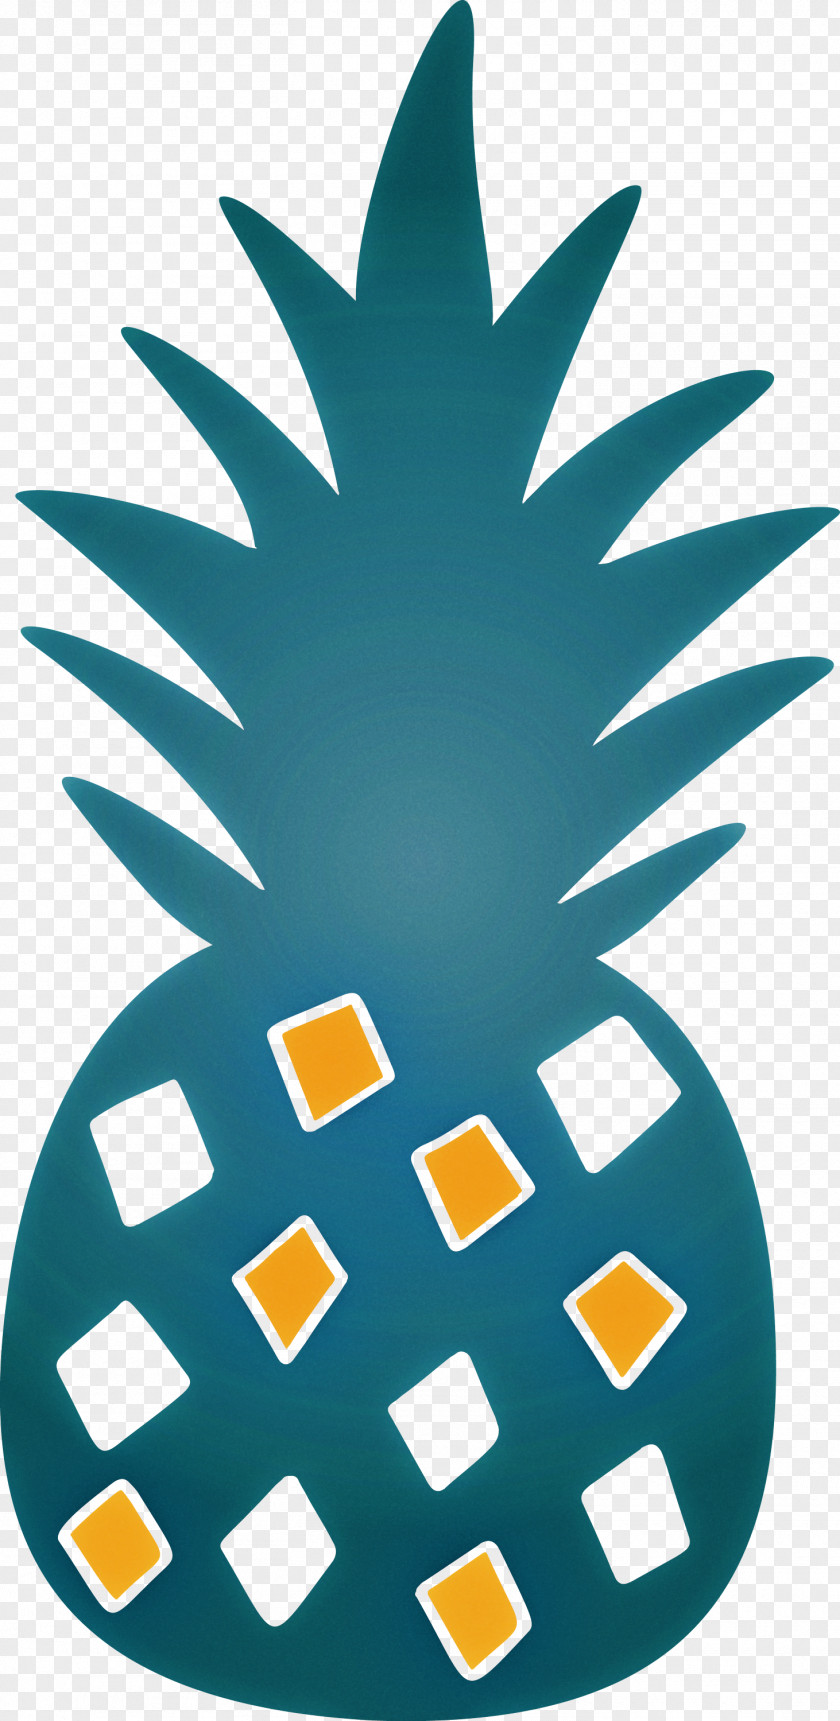 Pineapple Tropical Summer PNG